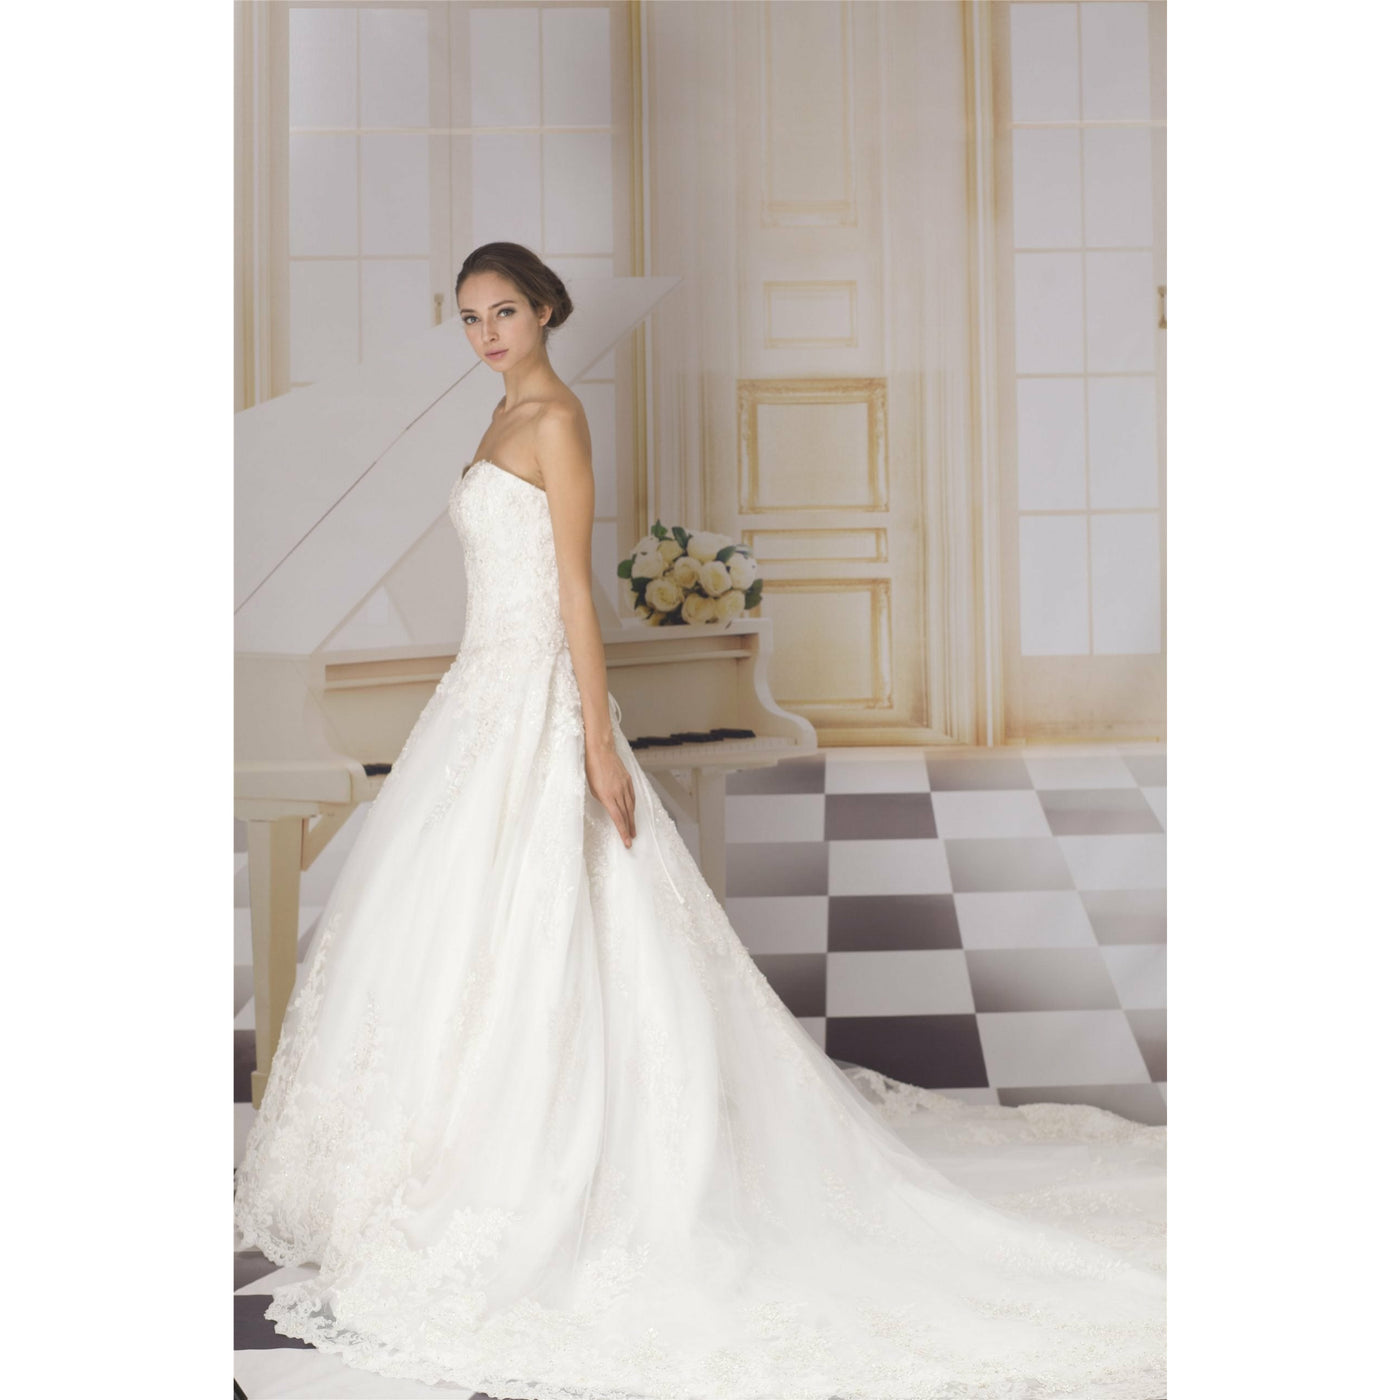 Chicely sweetheart crystal beaded wedding ball gown2